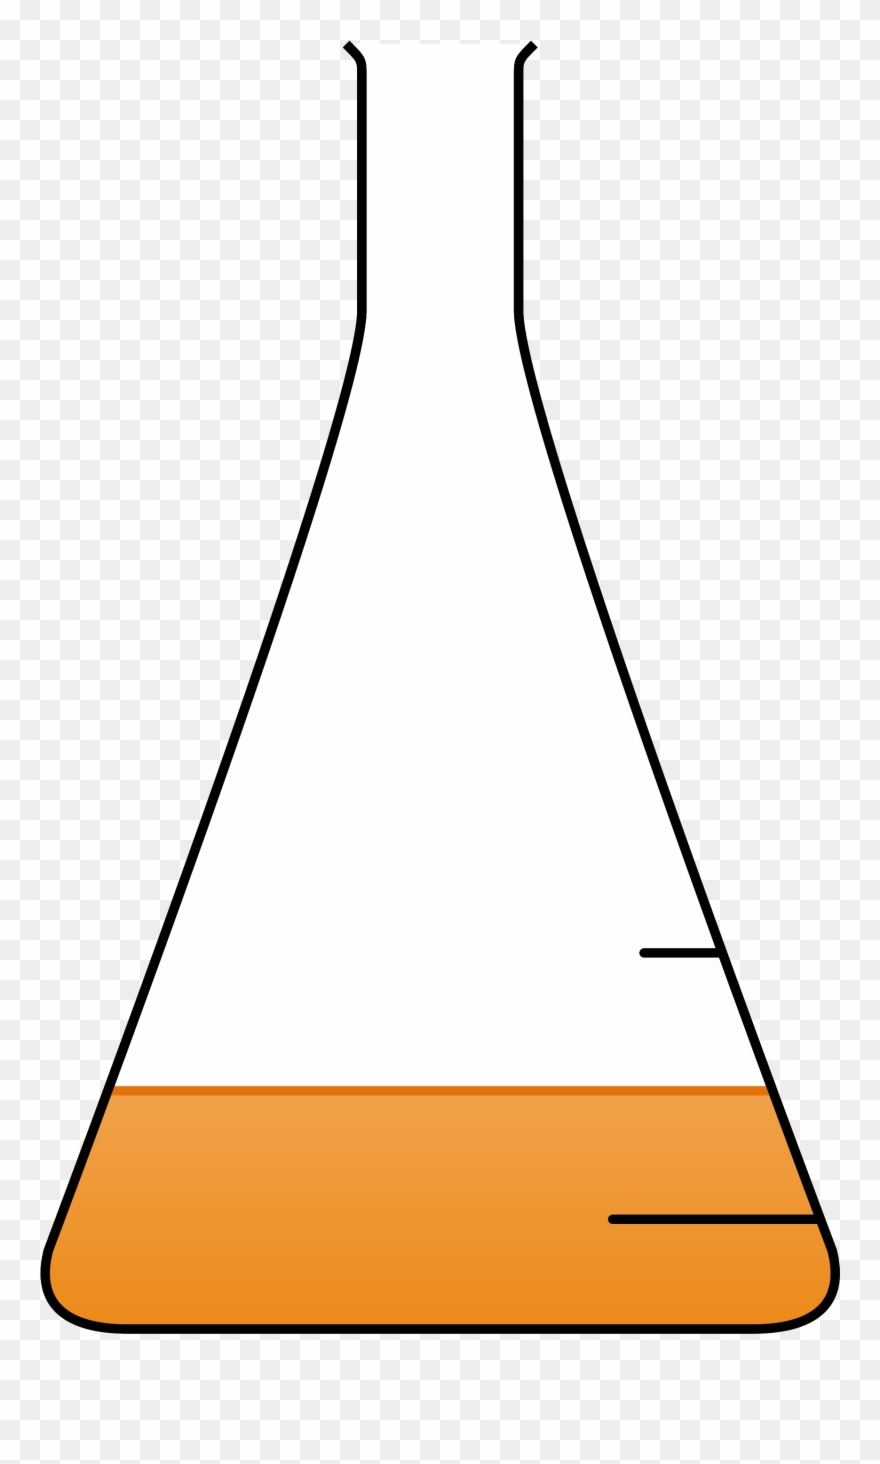 Bacteria clipart bacterial culture. Open erlenmeyer flask 